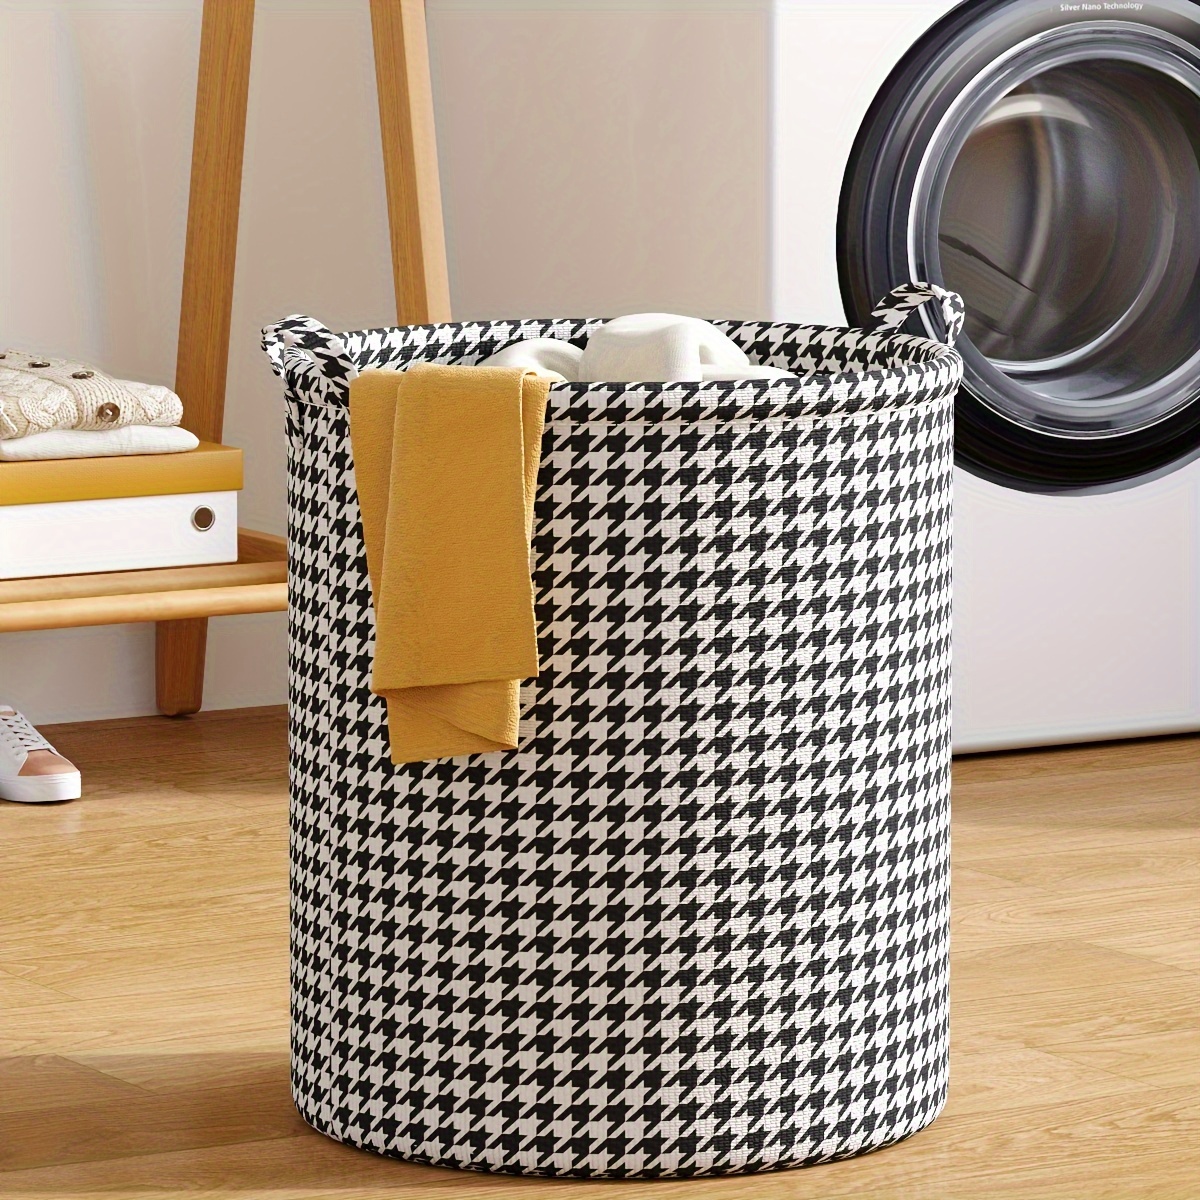 

1pc Classic Black And White Houndstooth Foldable Laundry Basket, Storage Hamper For Bathroom, Toy And Clothes Organizer Bin, Durable Material With Handles